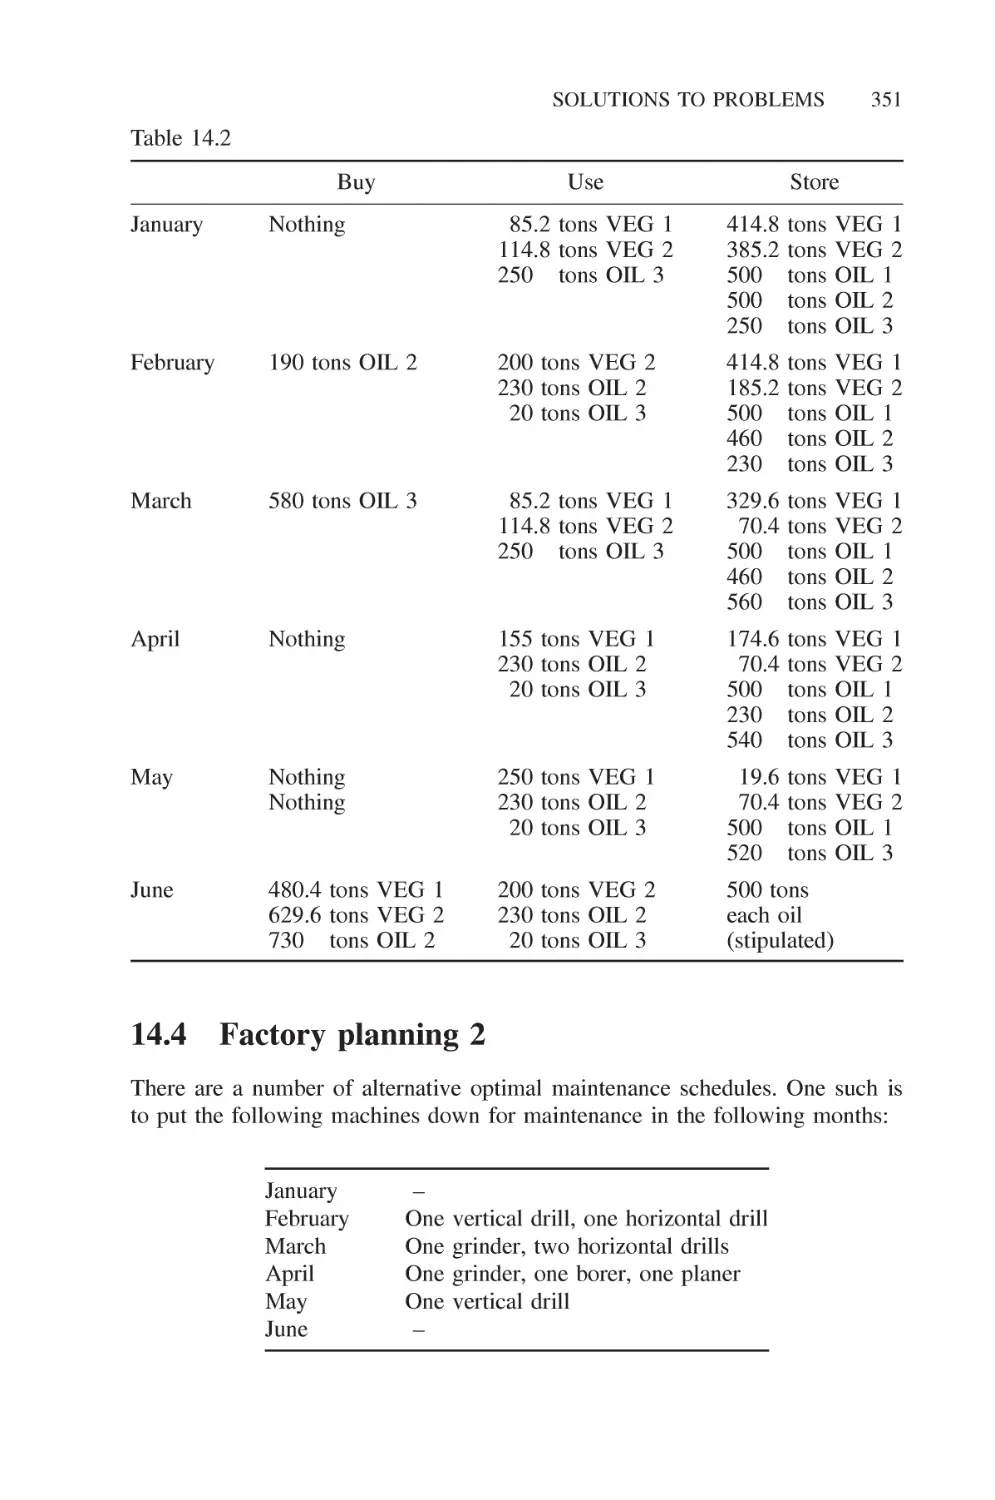 14.4 Factory planning 2